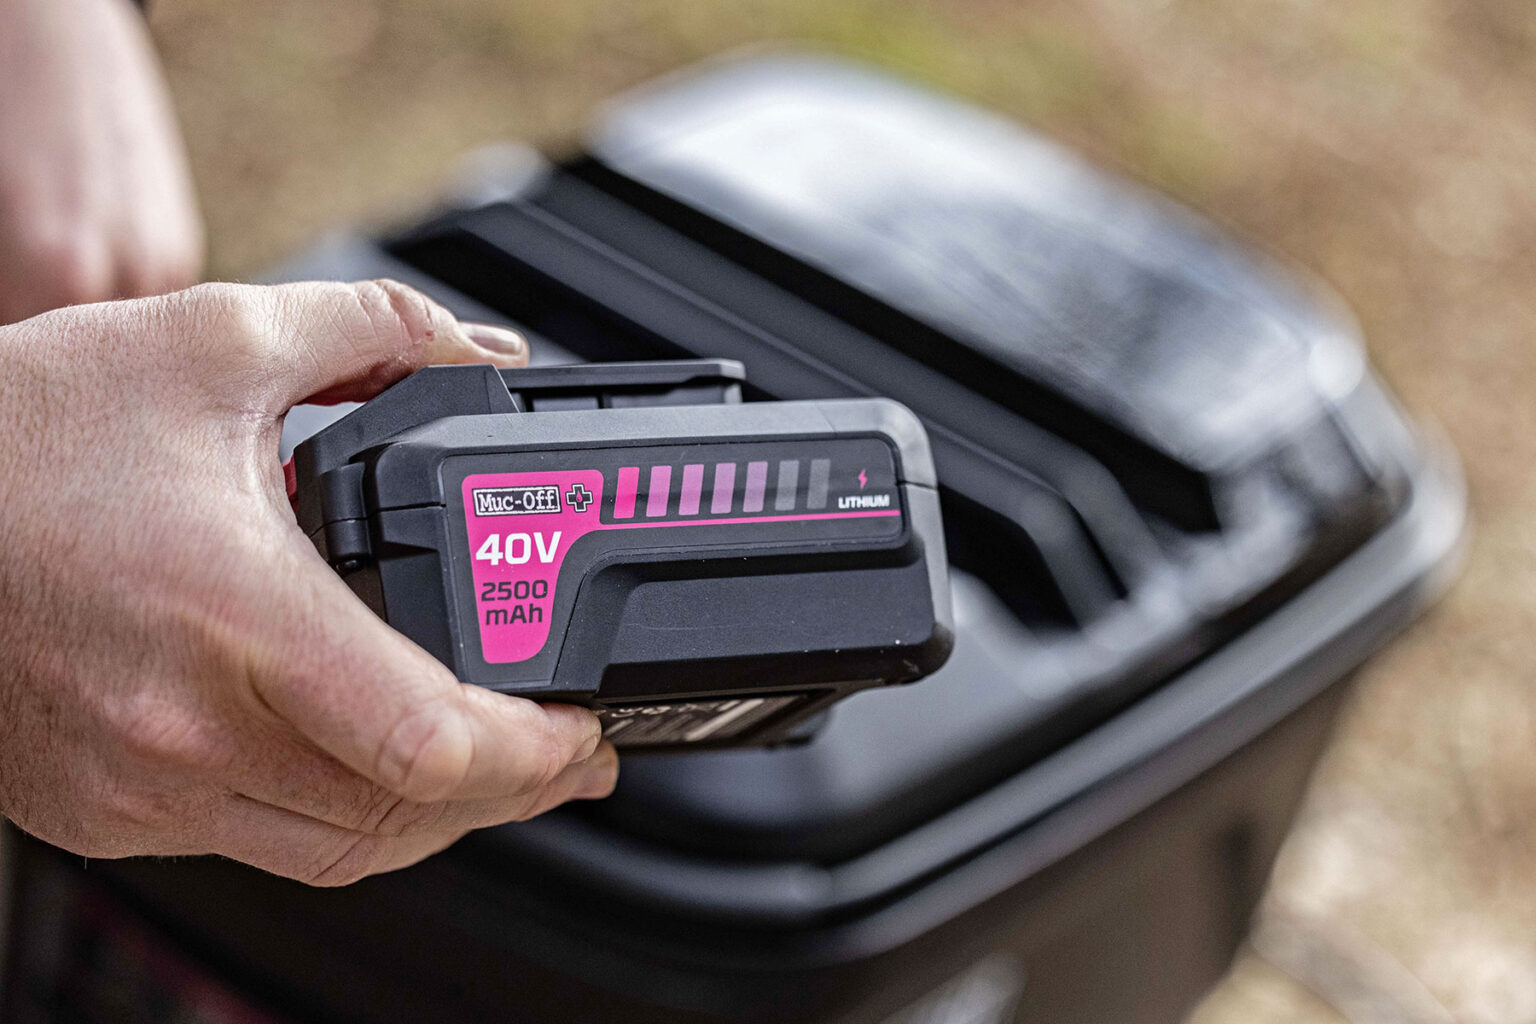 Muc-Off portable rechargeable Mobile Bike Pressure Washer, powered by 40V cordless drill batteries